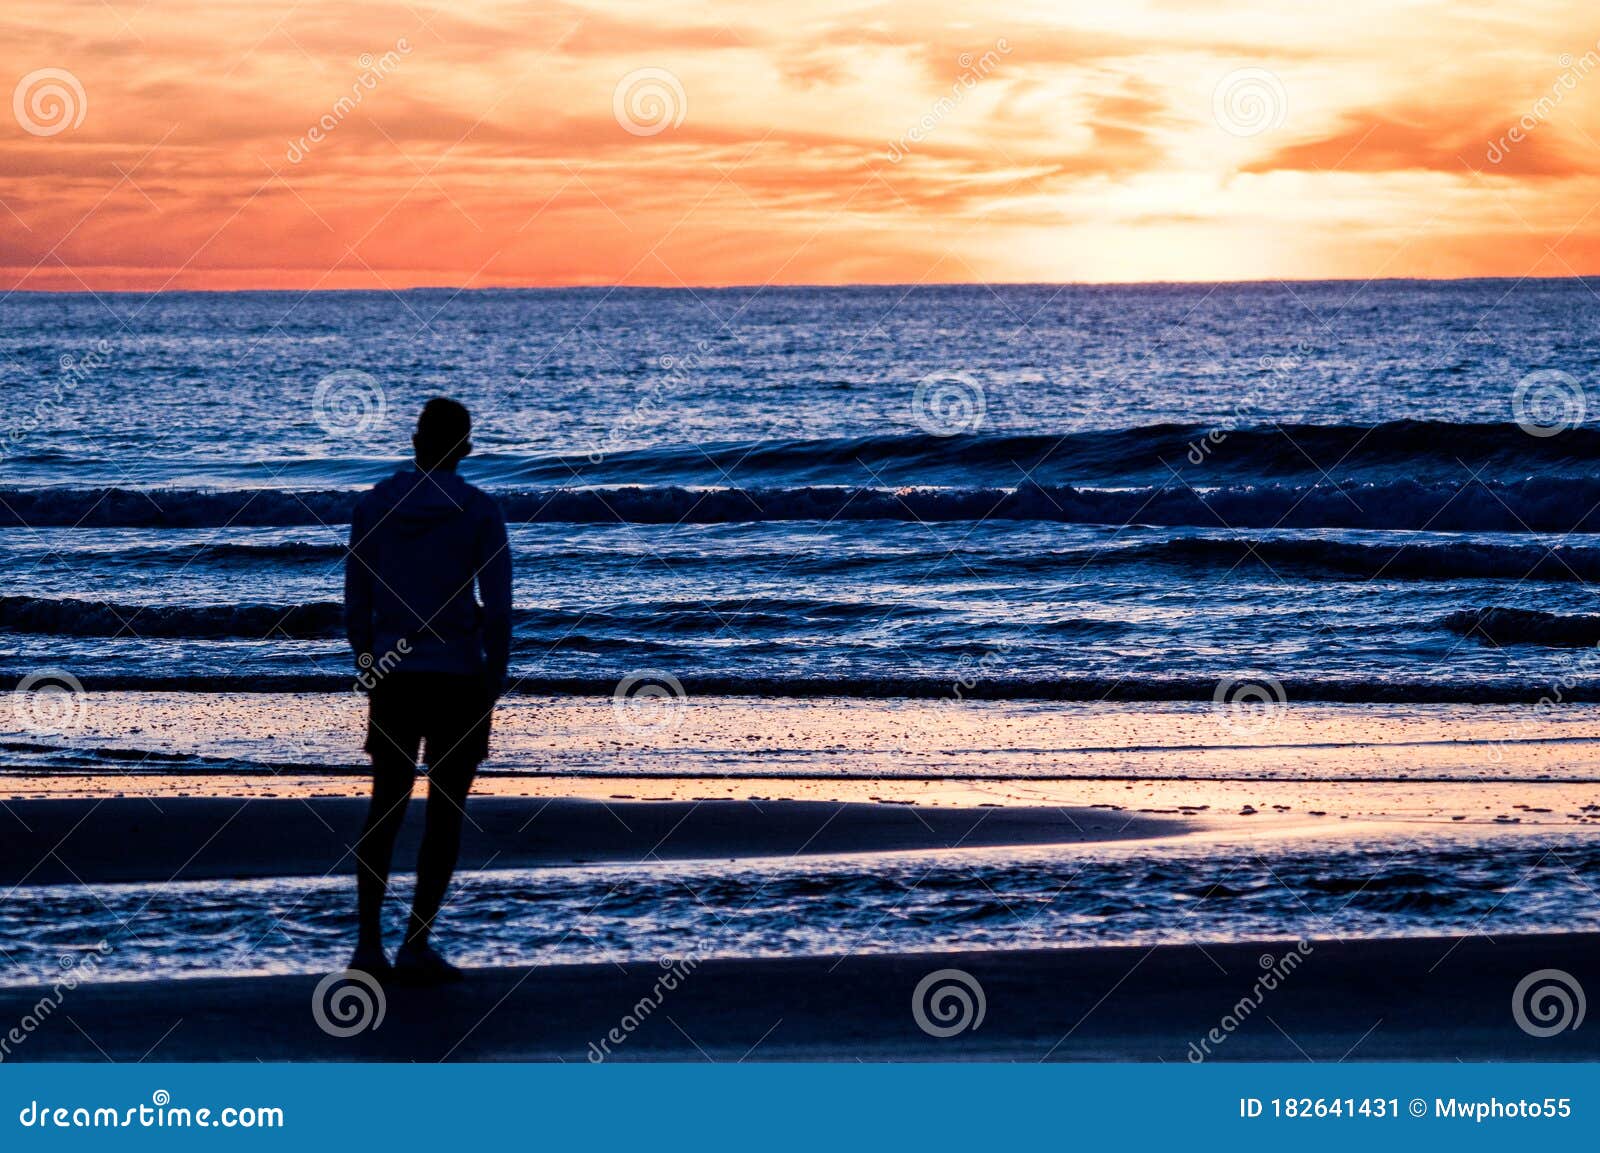 alone man silueta looking at the sea at dusk but blue and red sky in the background